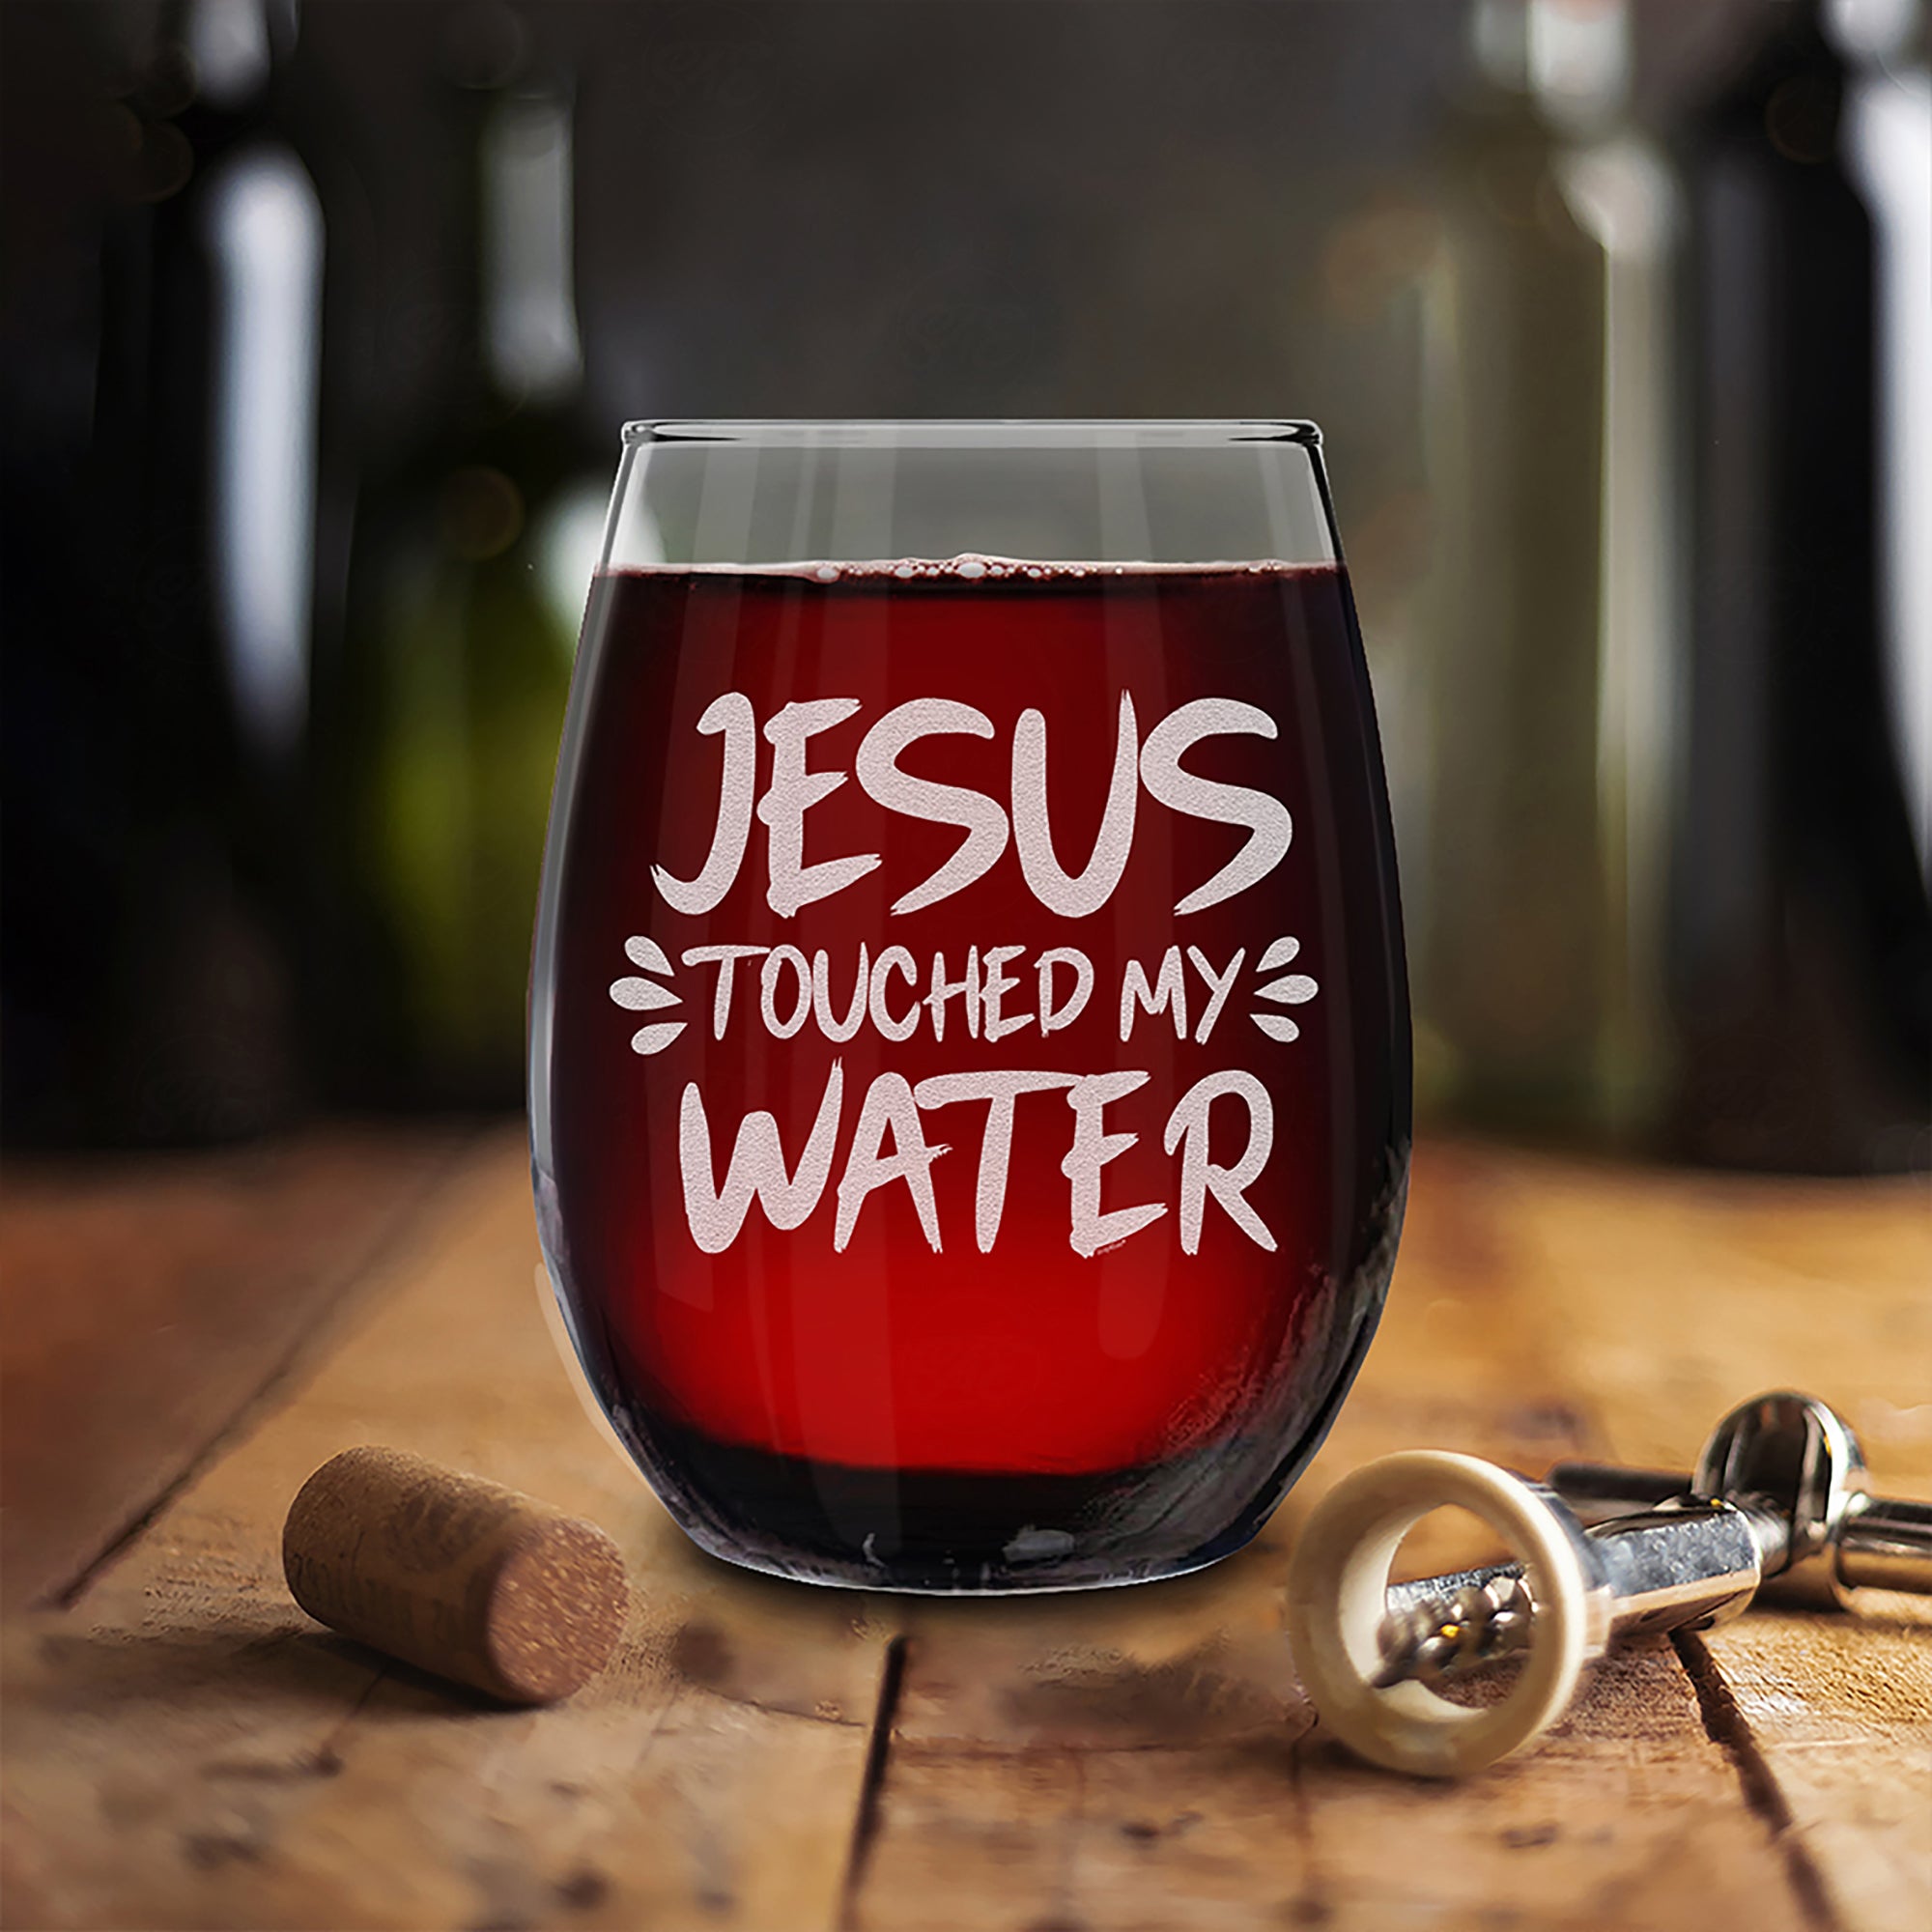 Jesus Touched My Water Engraved Stemless Wine Glass Funny Jesus Wine Glass